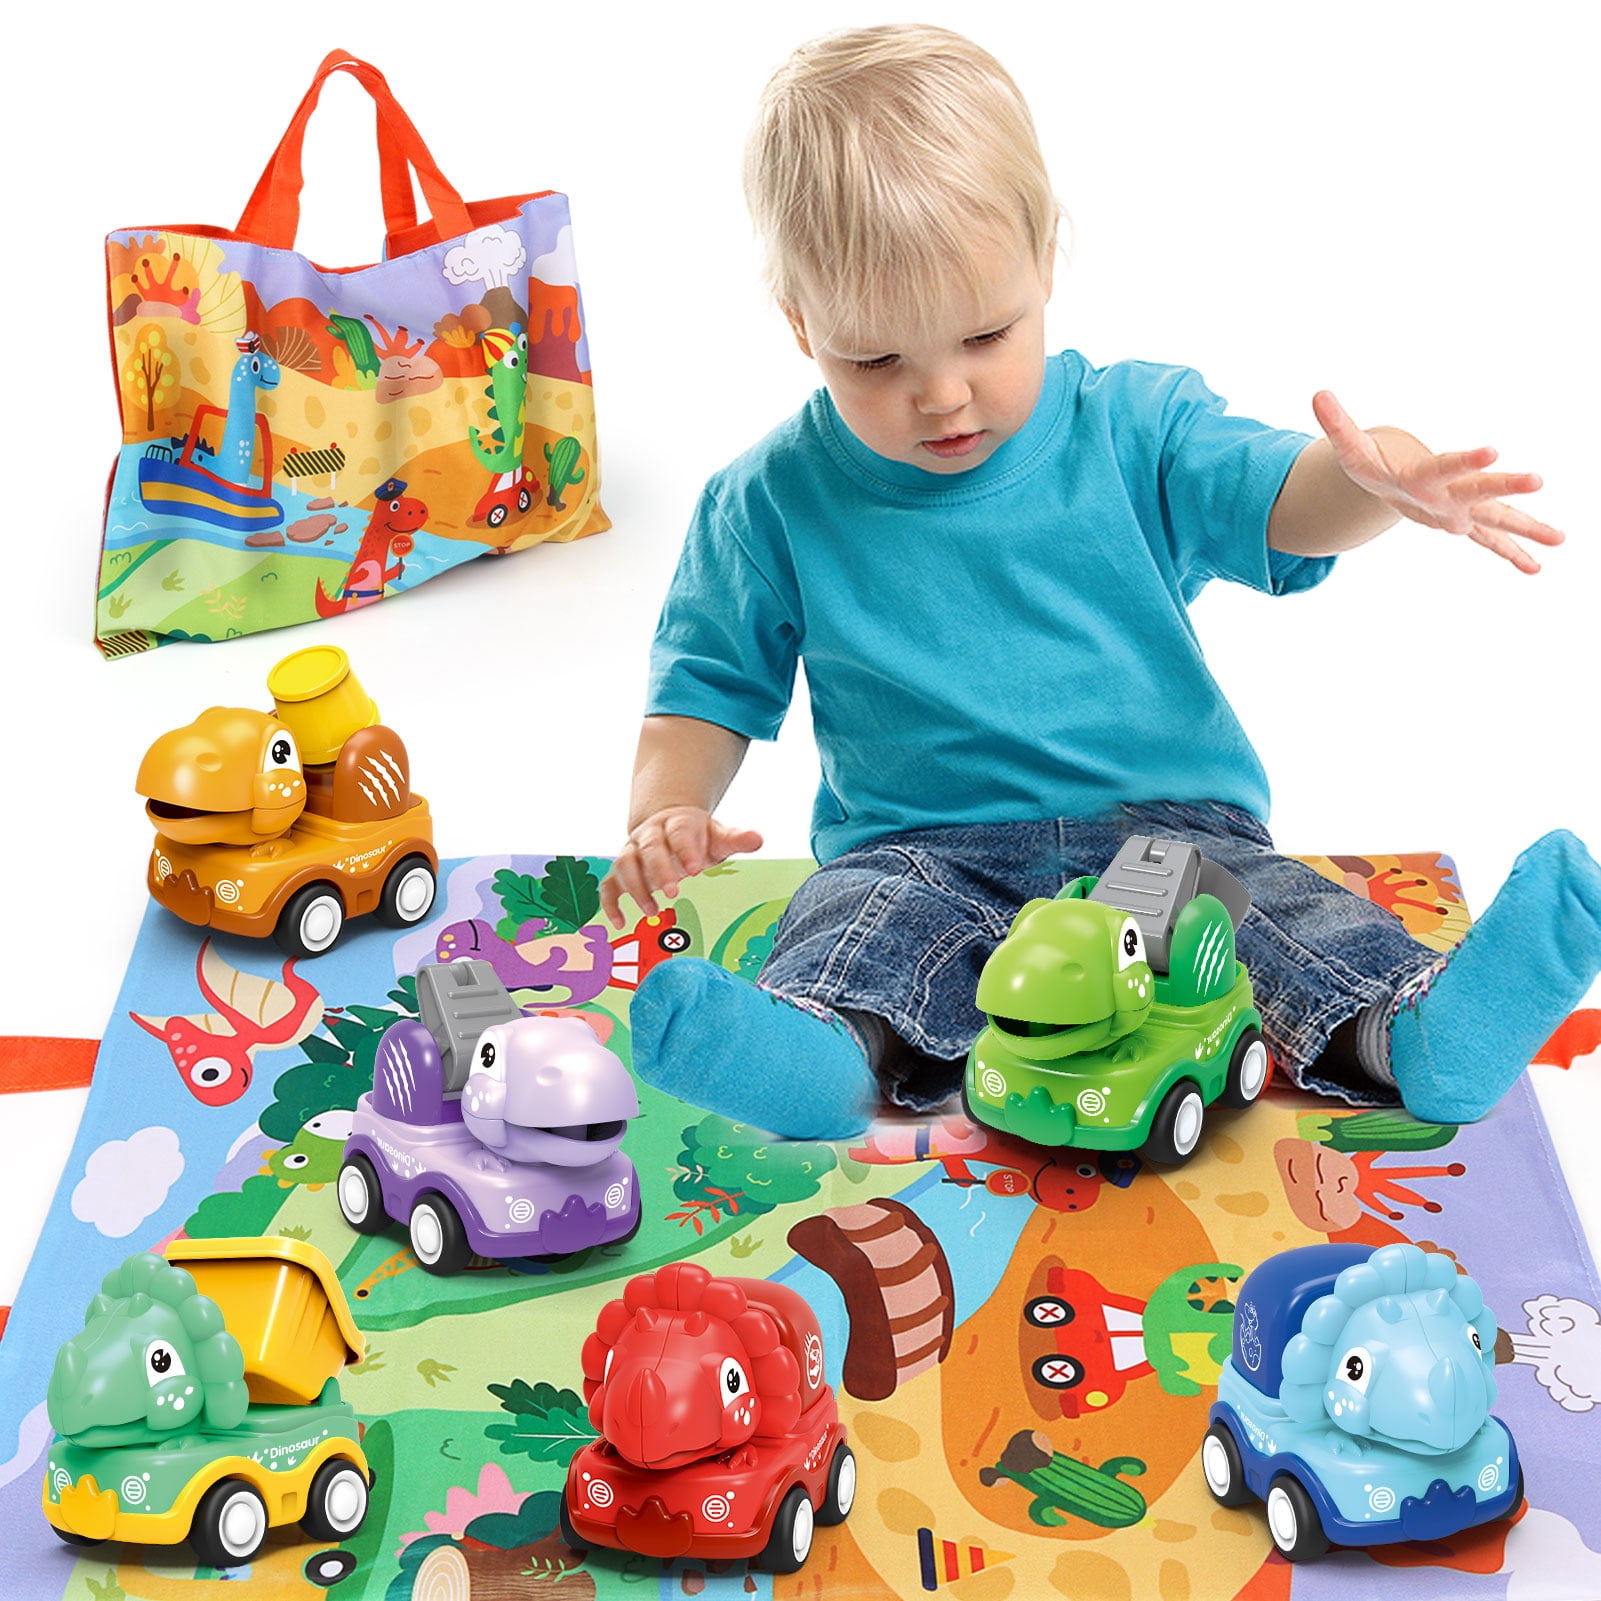 Toys for 2 year old boy